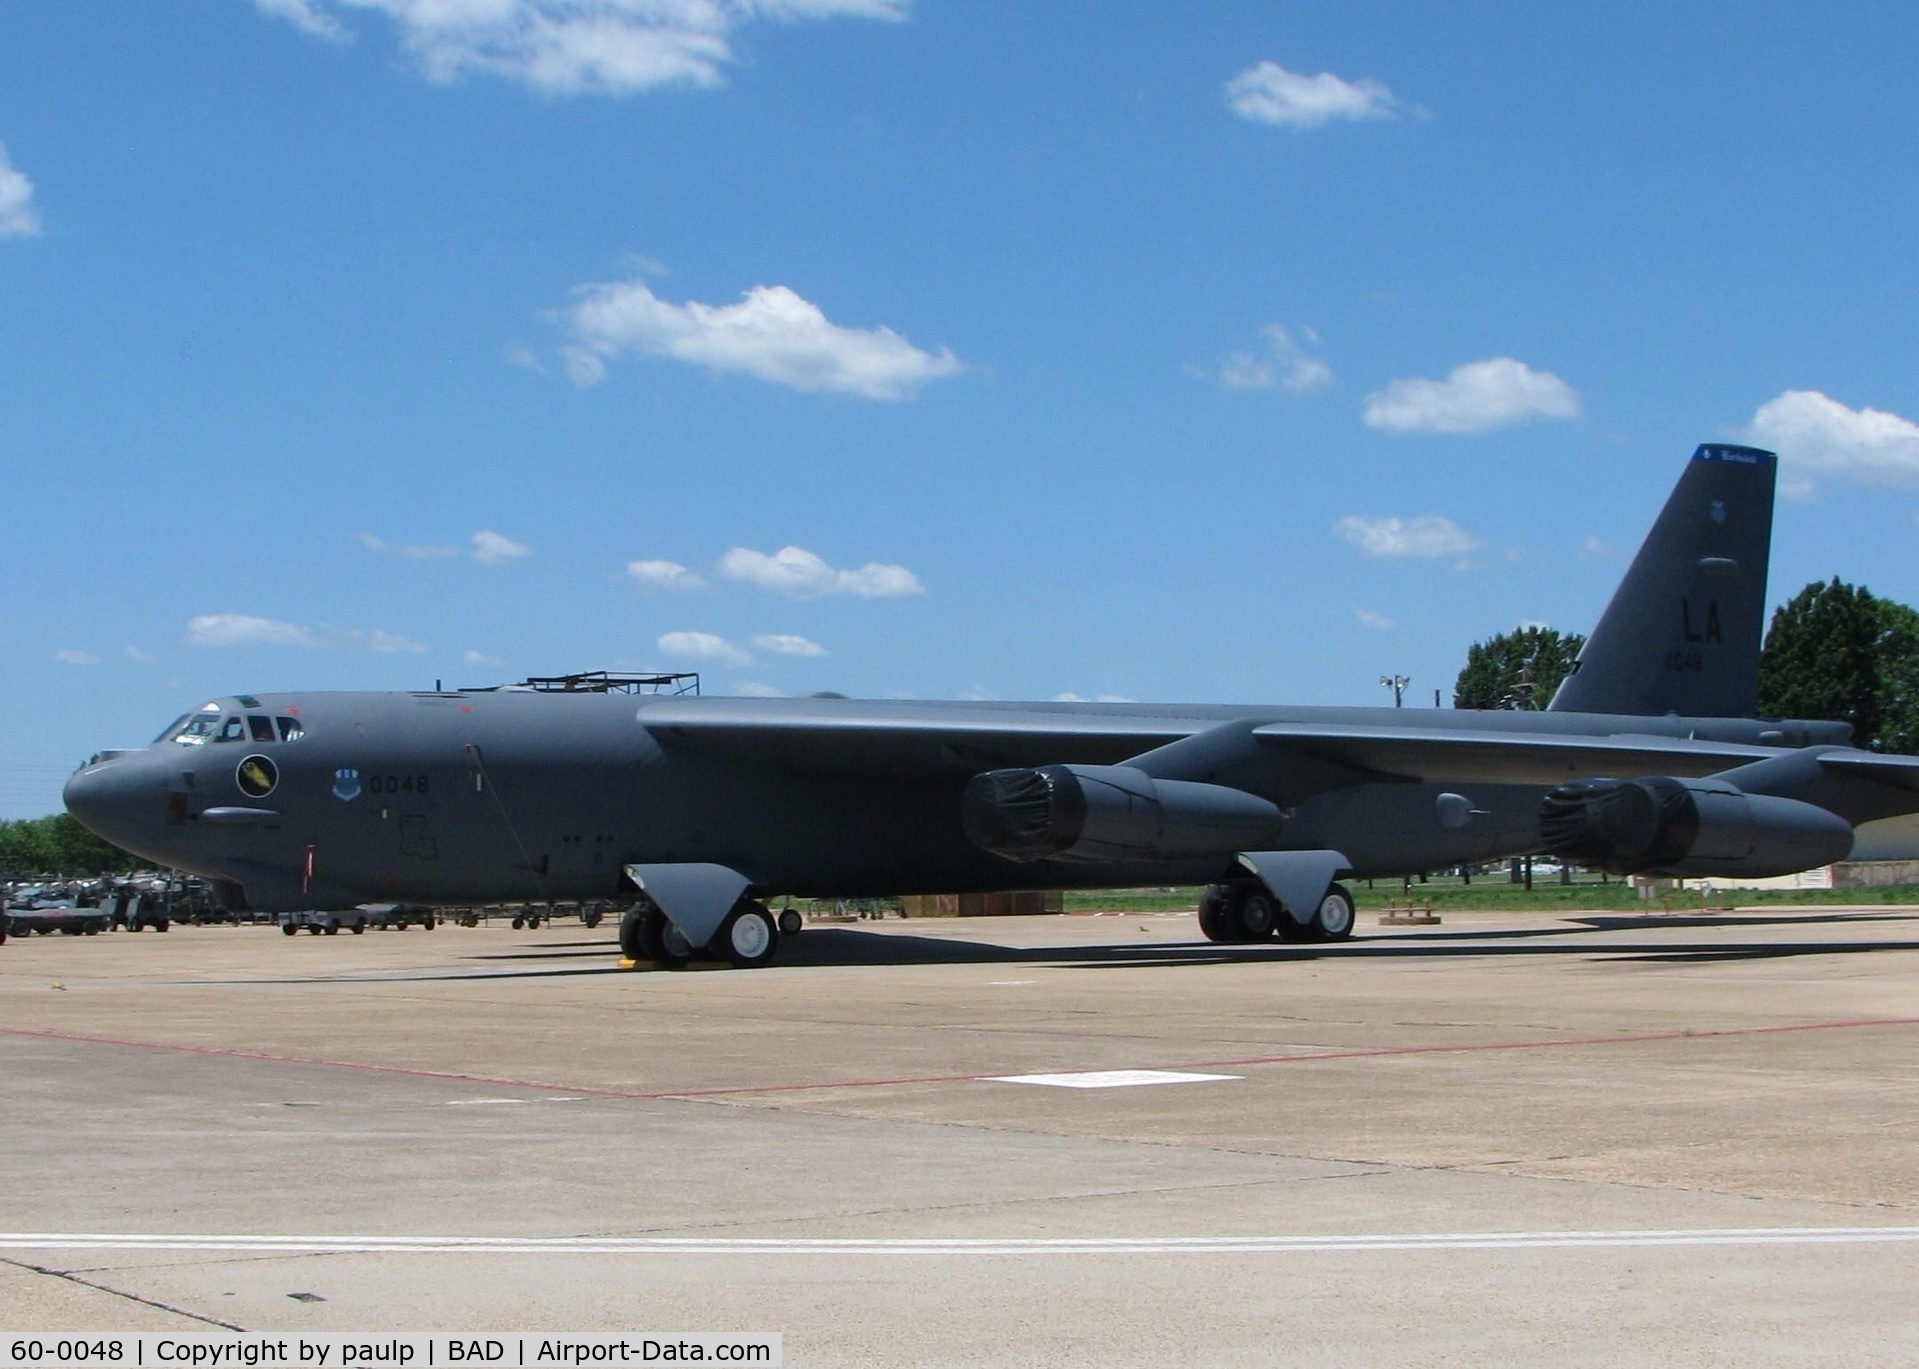 60-0048, 1960 Boeing B-52H Stratofortress C/N 464413, At Barksdale Air Force Base.